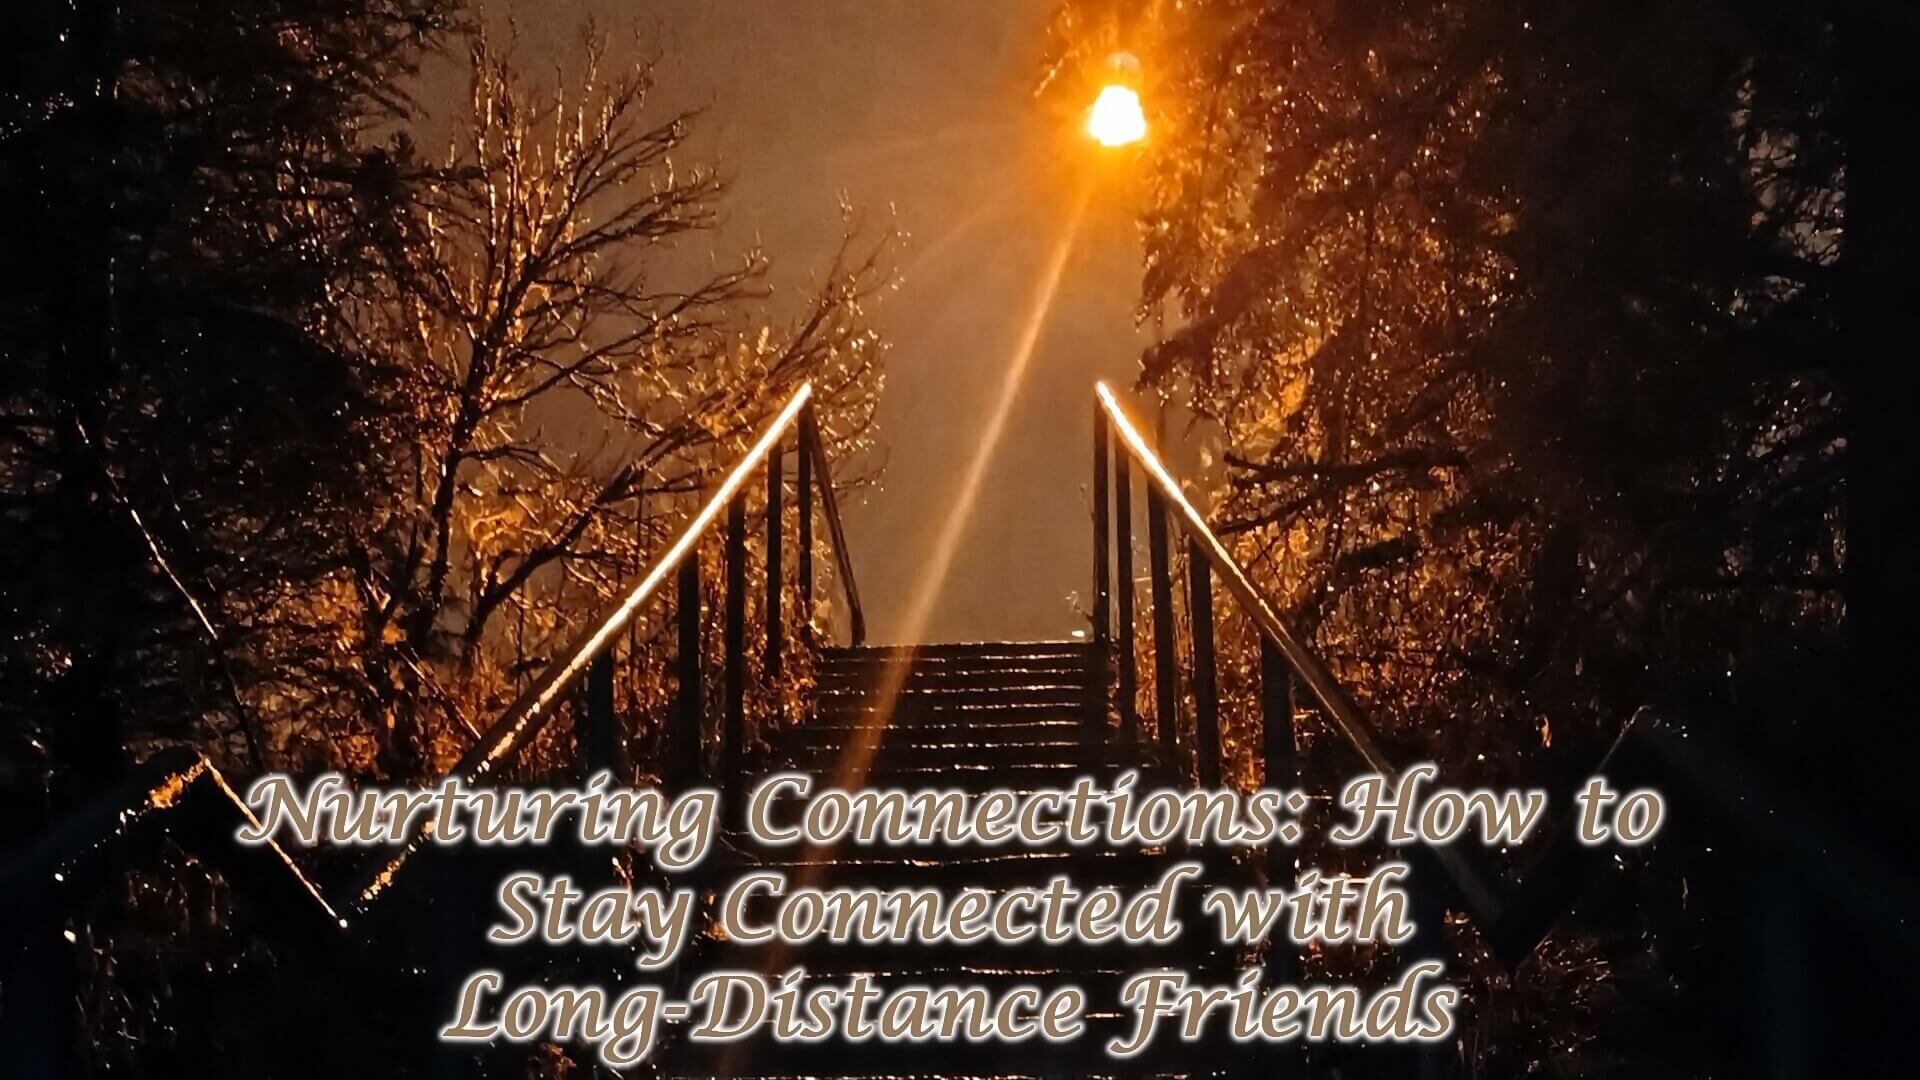 Nurturing Connections: How to Stay Connected with Long-Distance Friends